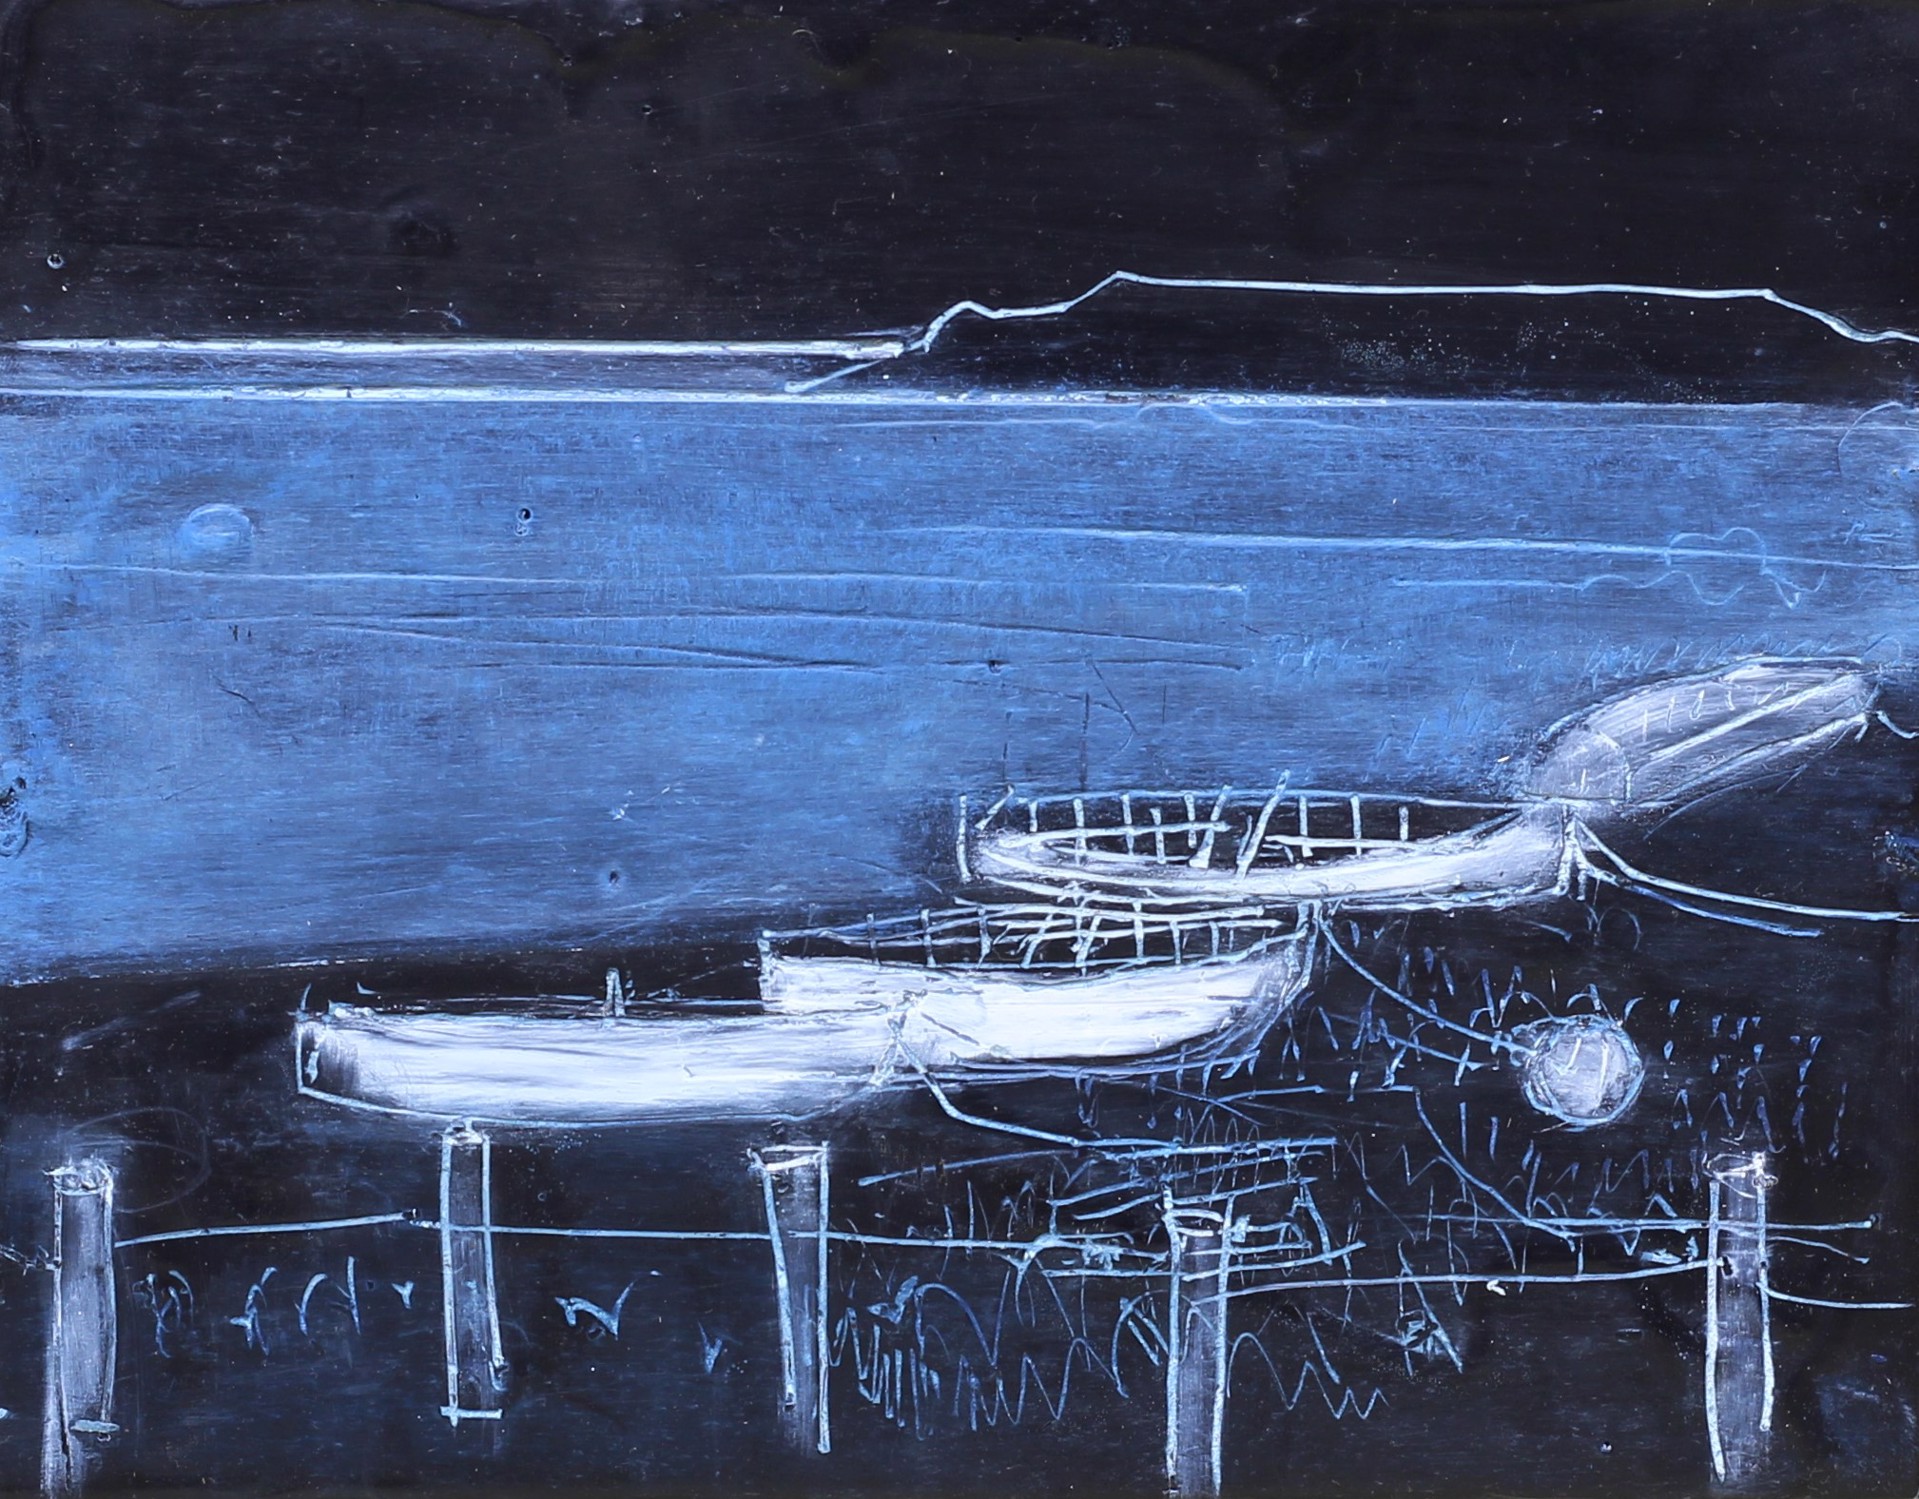 THE COVE AT NIGHT by CHRISTINA THWAITES (Landscape)